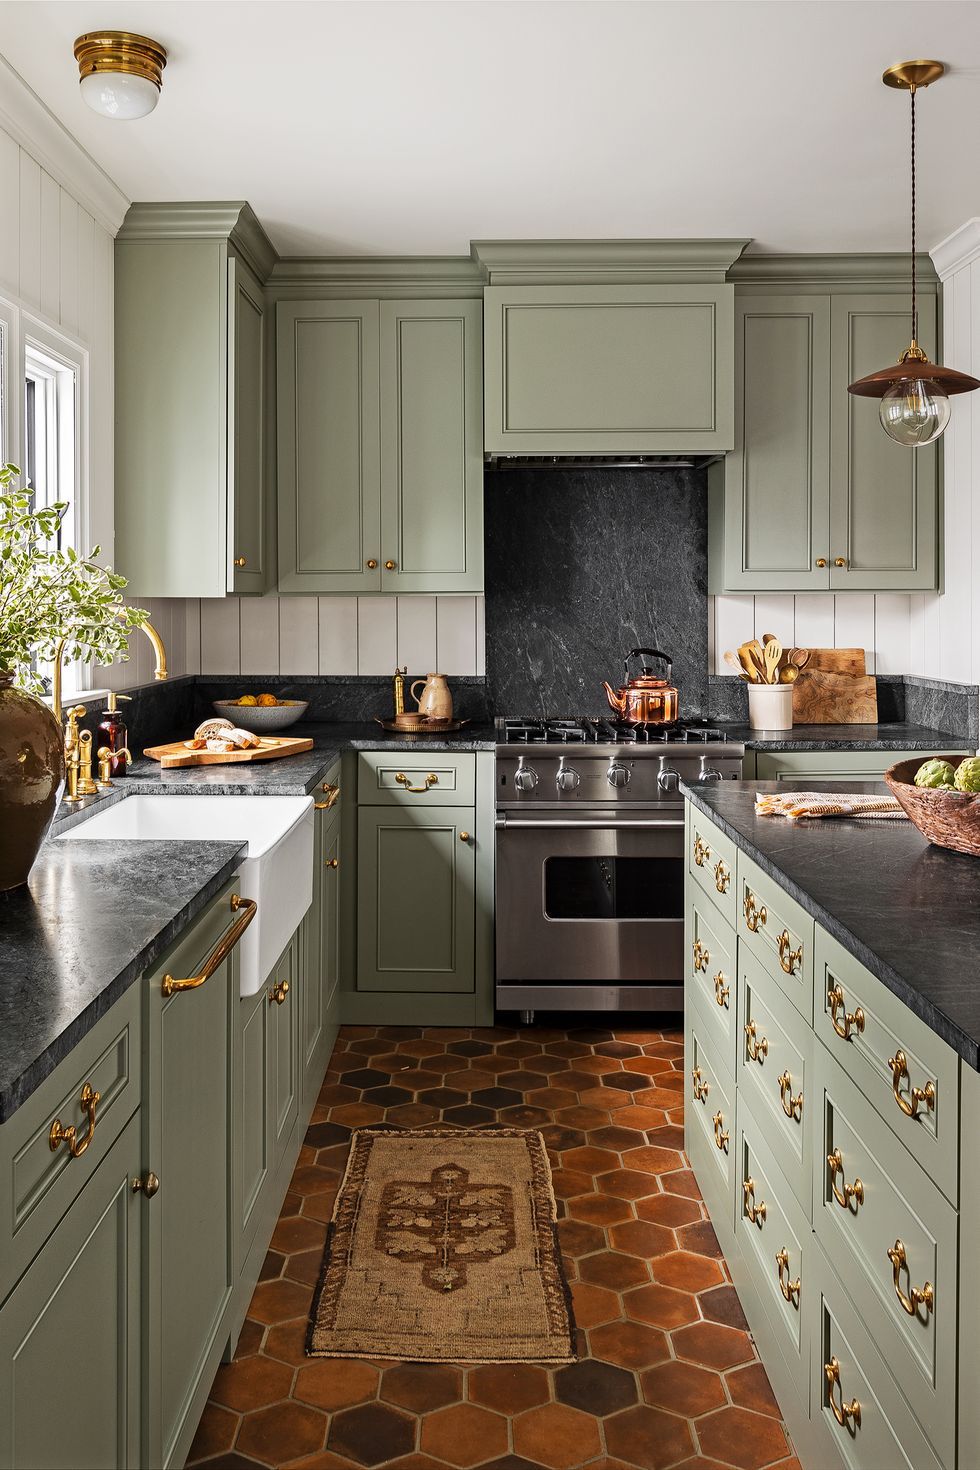 15 Best Green Kitchen Cabinet Ideas Top Green Paint Colors For Kitchens